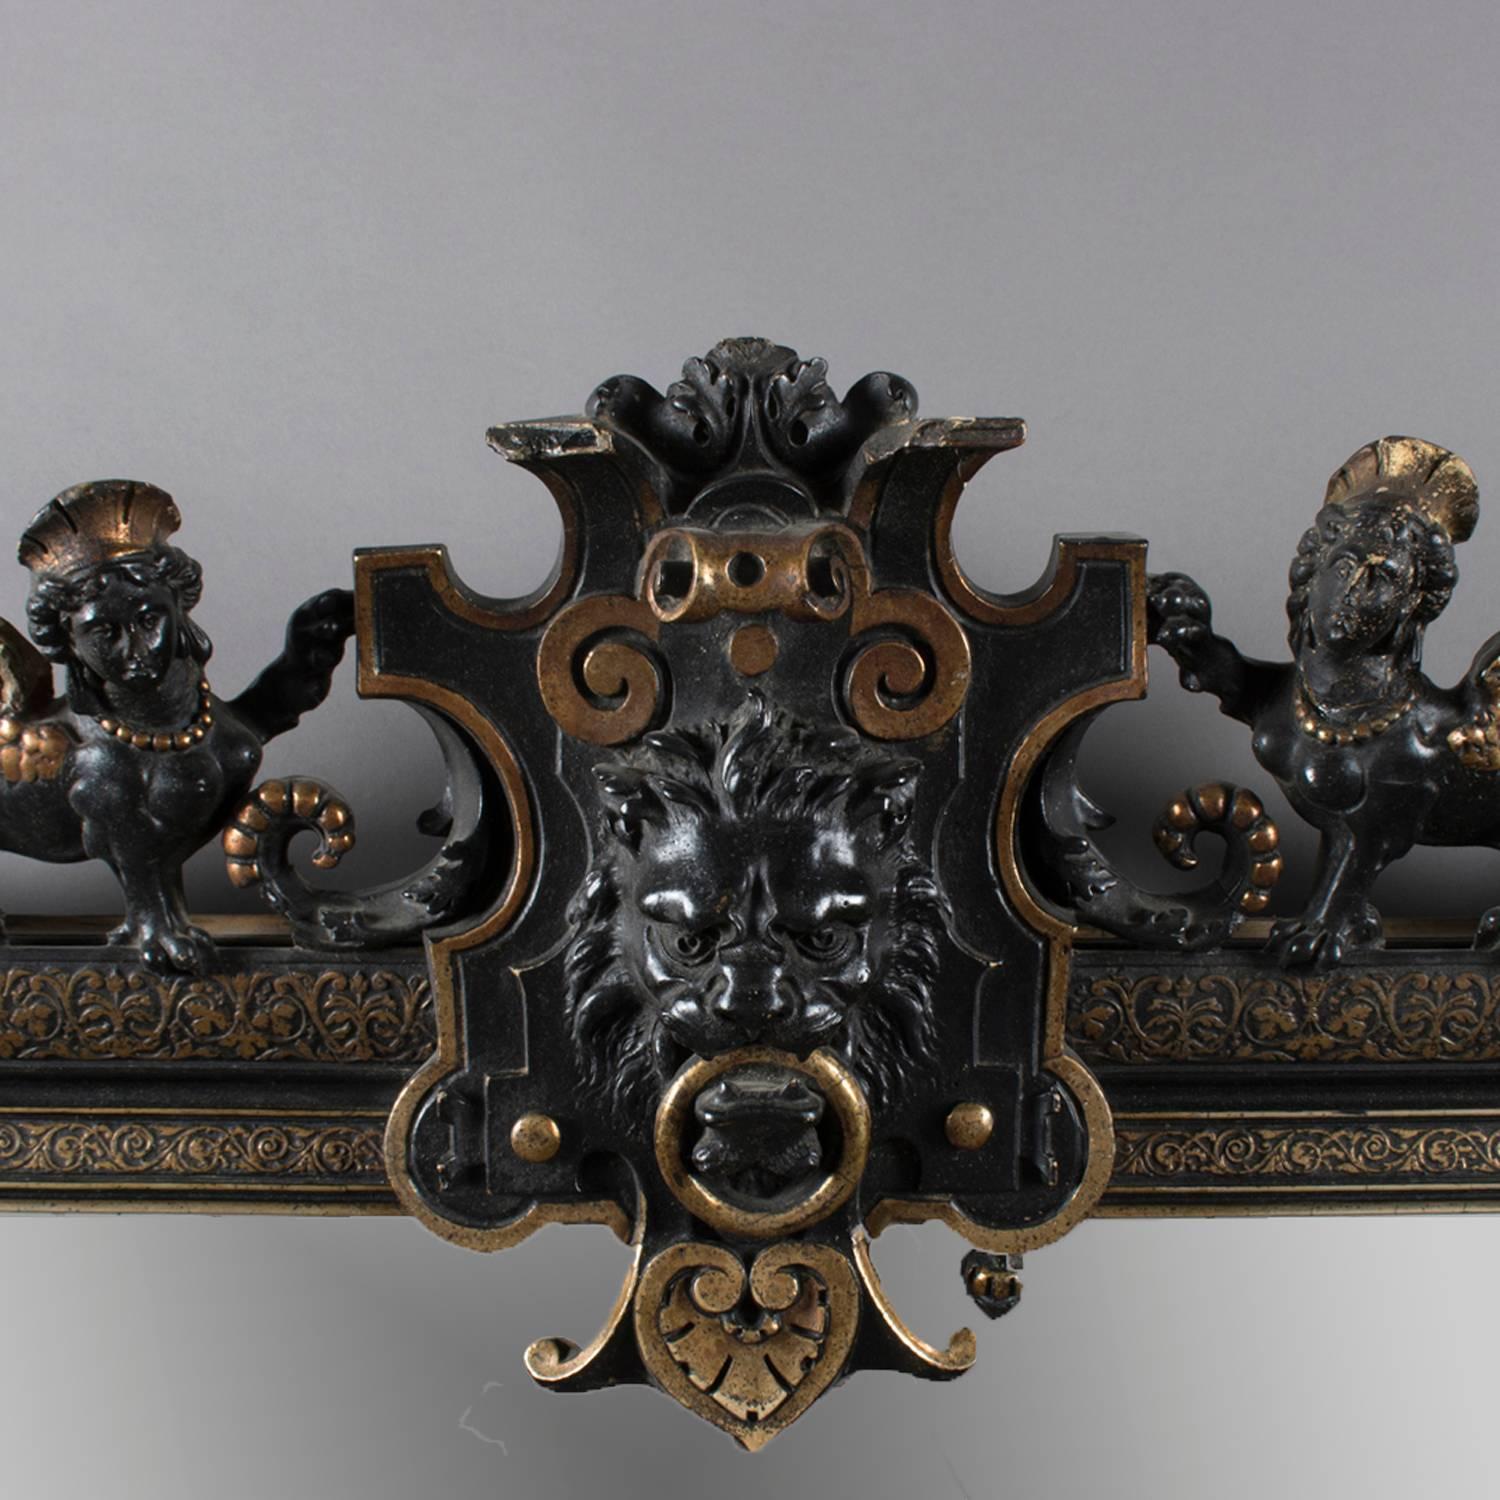 Large antique Baroque figural over mantel mirror features ebonized and carved scroll and foliate decorated frame with pierced crest having central lion mask with flanking Greek Sphinx and pierced scroll form apron, gilt accents throughout and